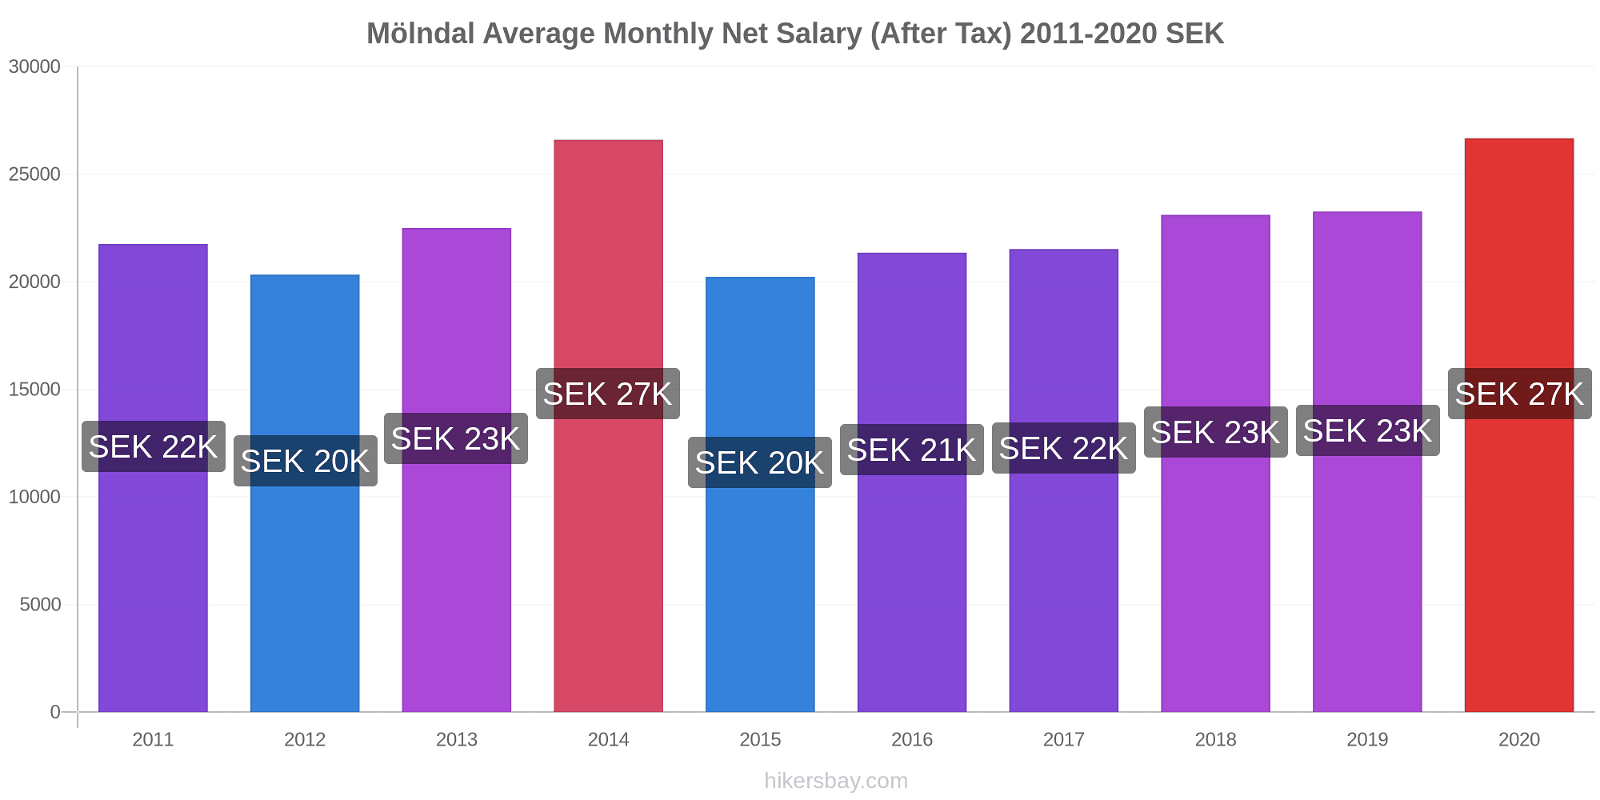 Mölndal price changes Average Monthly Net Salary (After Tax) hikersbay.com